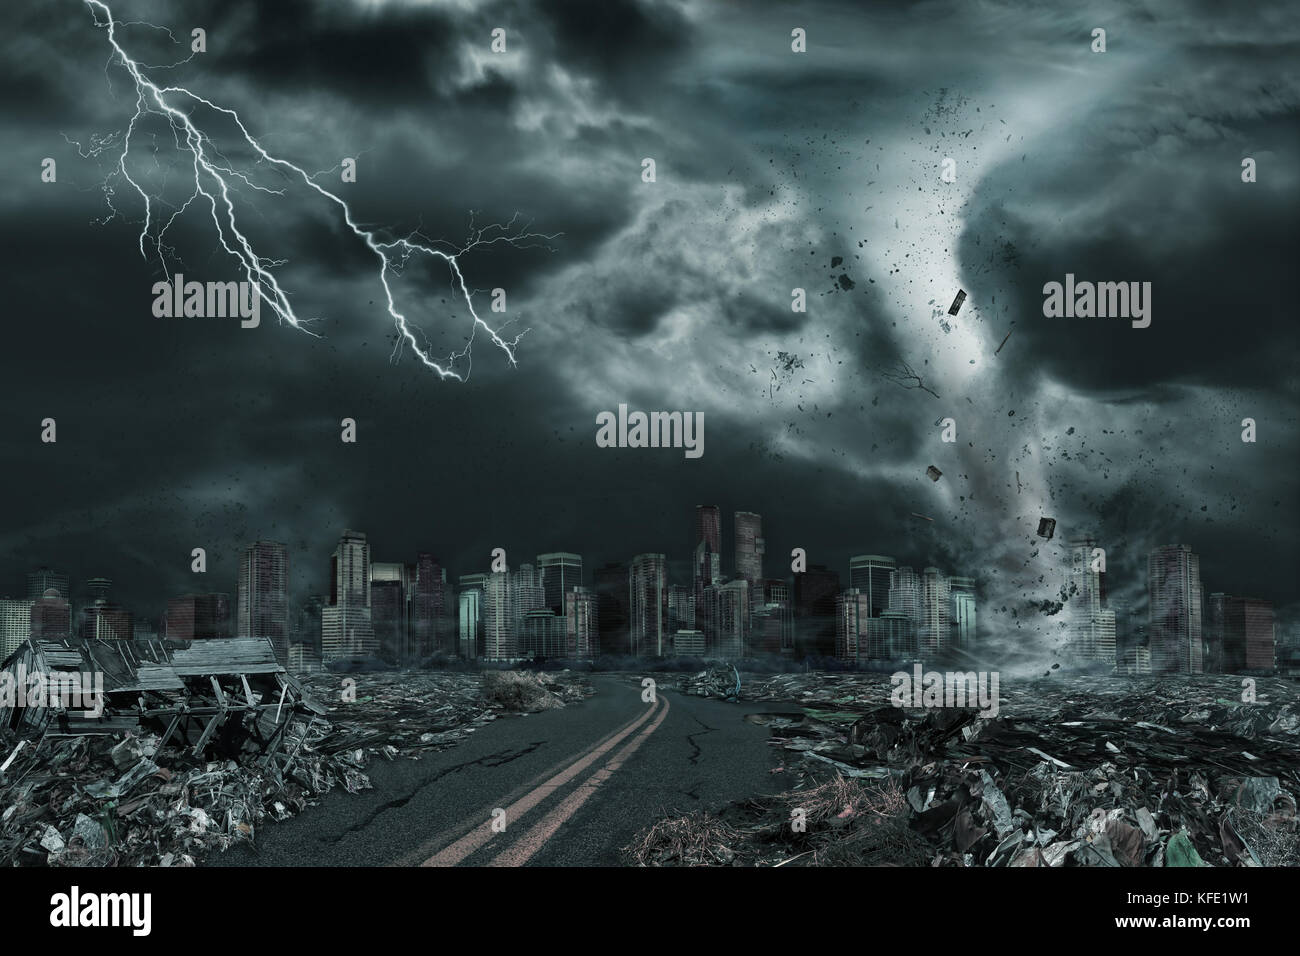 3D illustration of tornado or hurricane's detailed destruction along its path toward fictitious city with flying debris and collapsing structures. Con Stock Photo